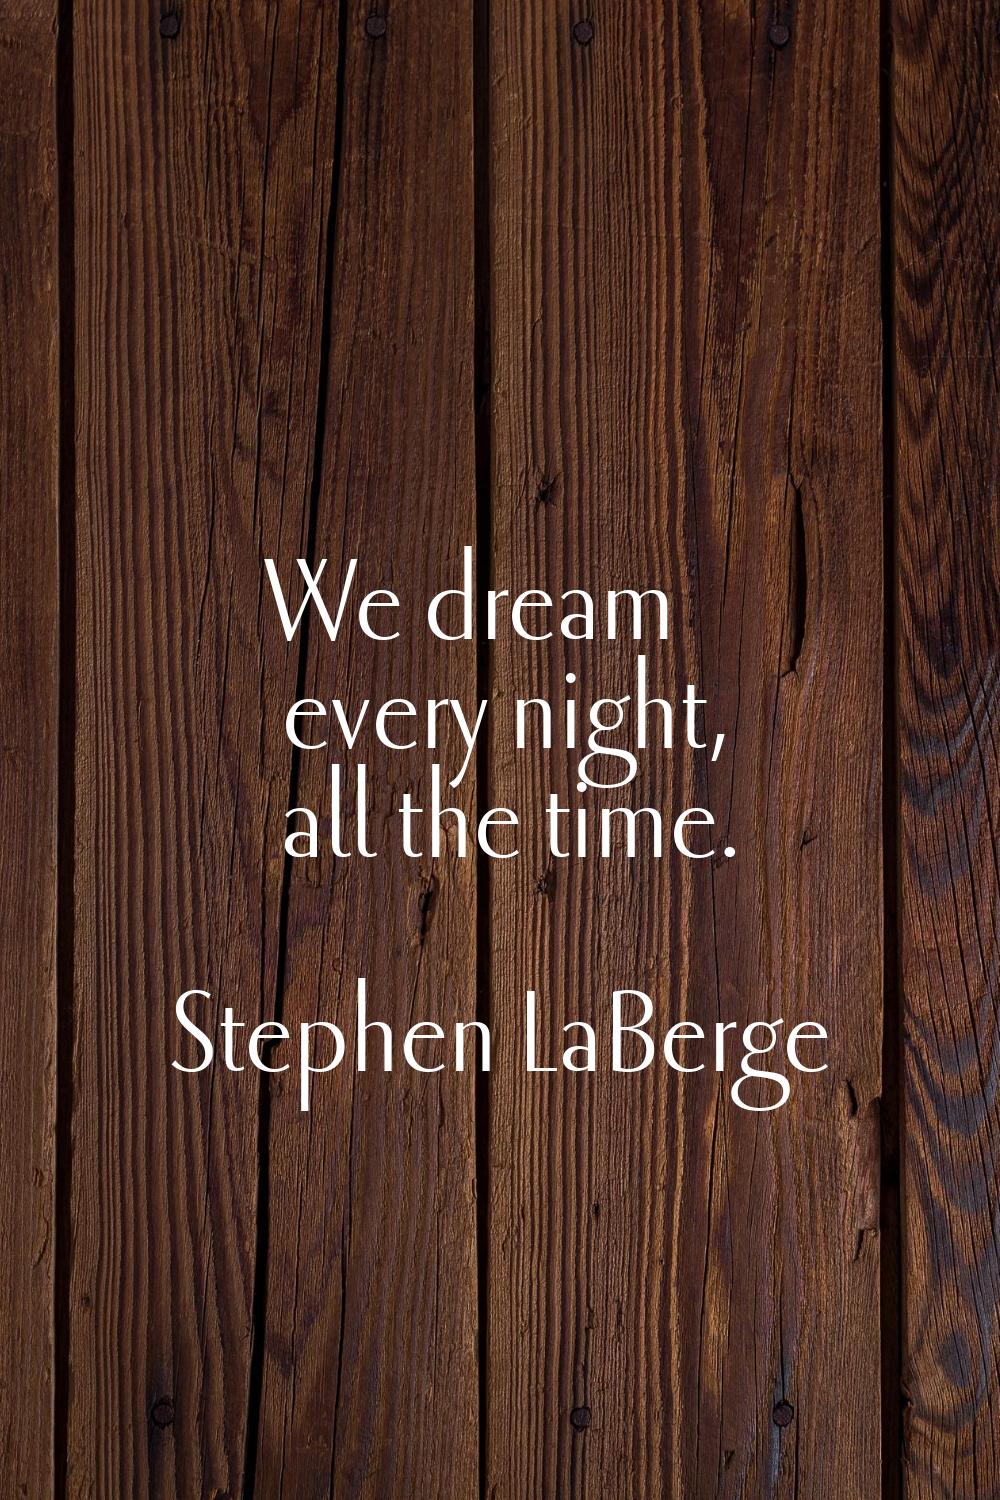 We dream every night, all the time.